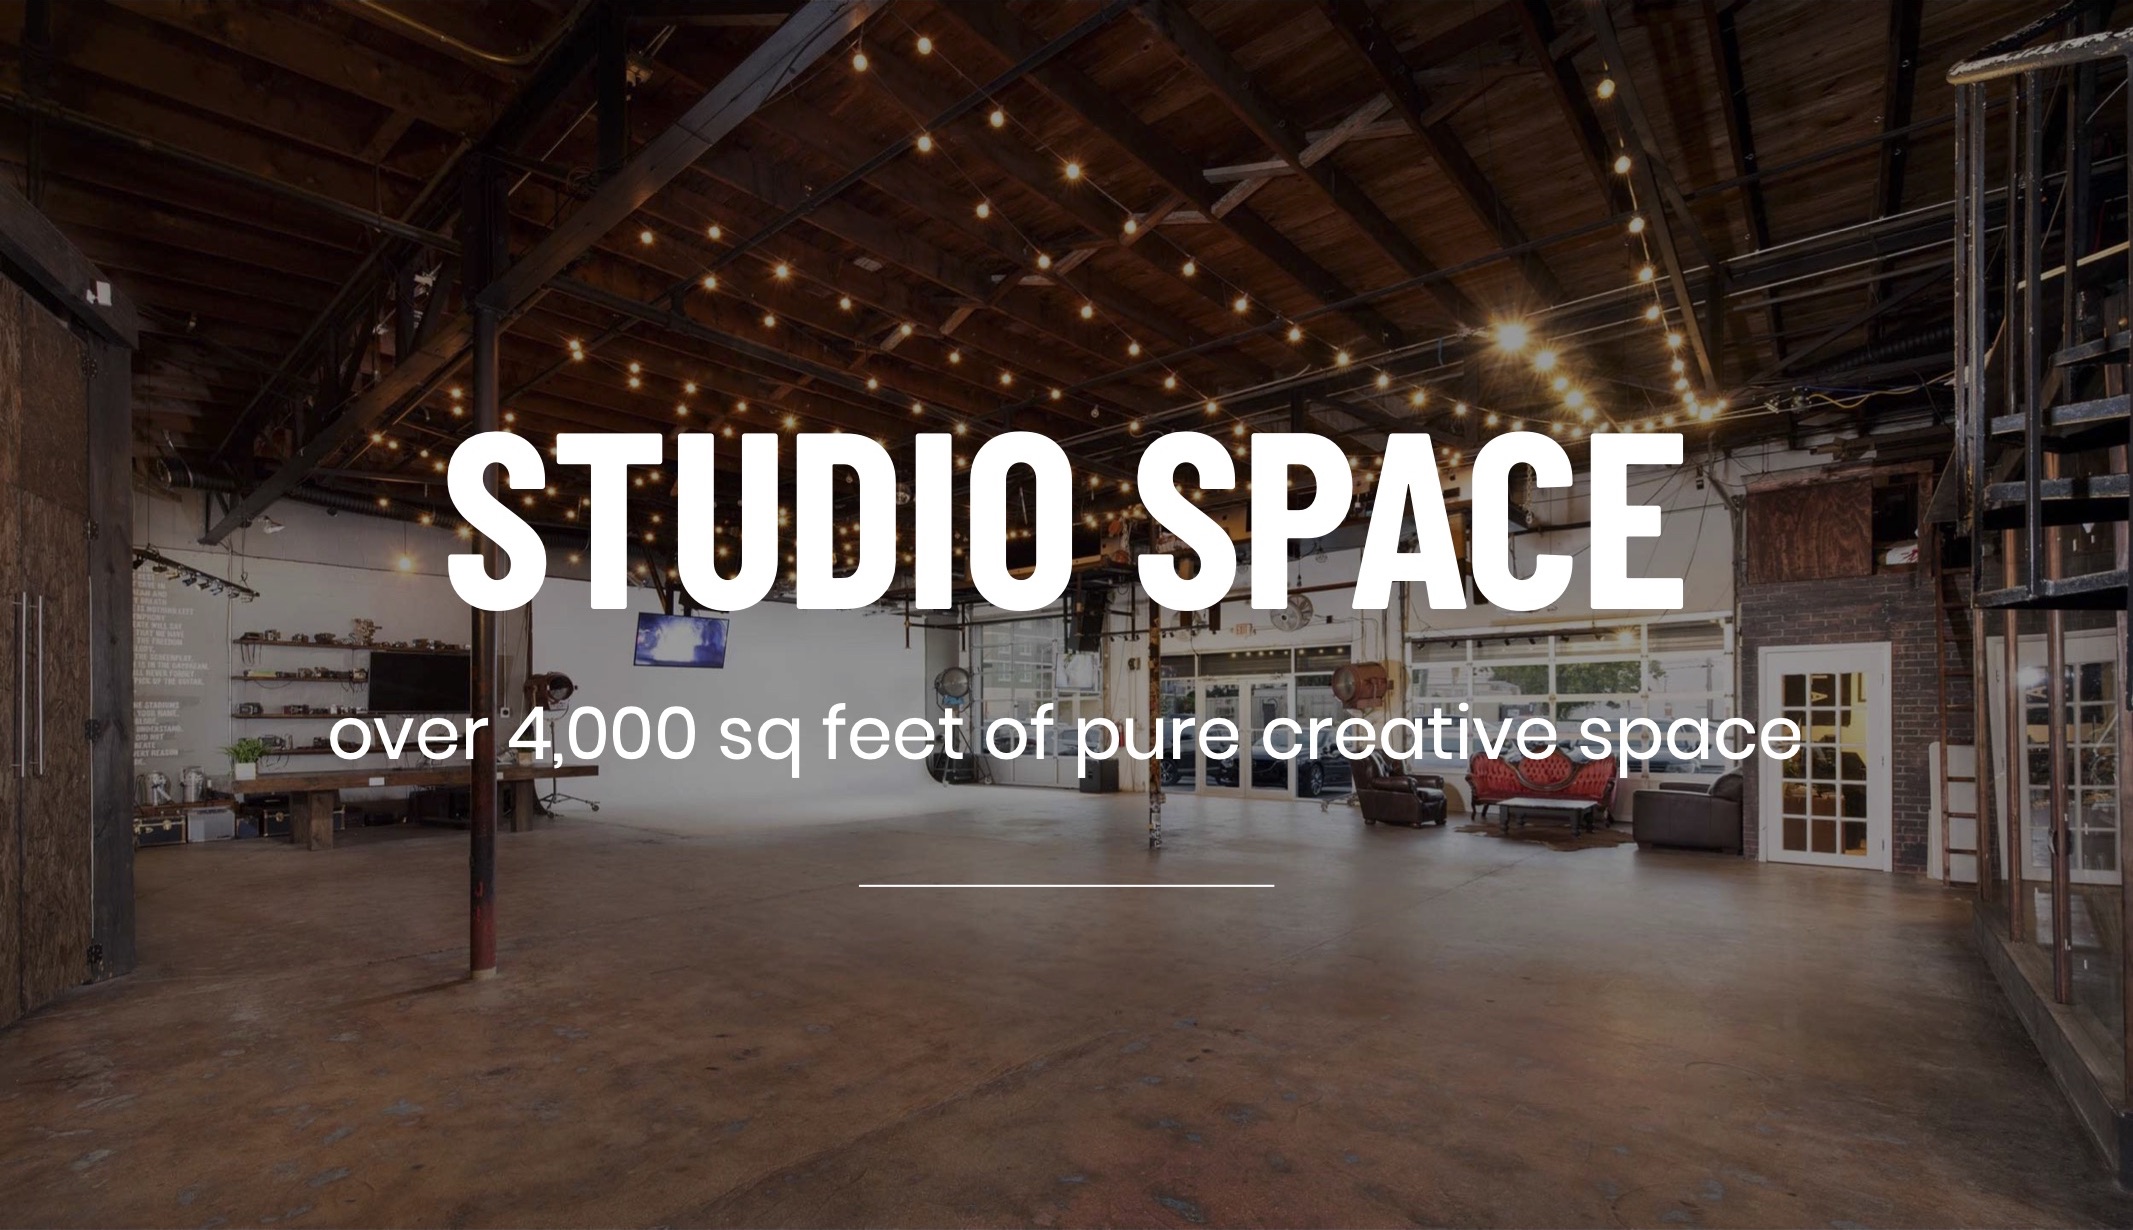 Production Resources White Studio Space over 4000 sq feet of pure creative space title on background of studio space at CI Studios